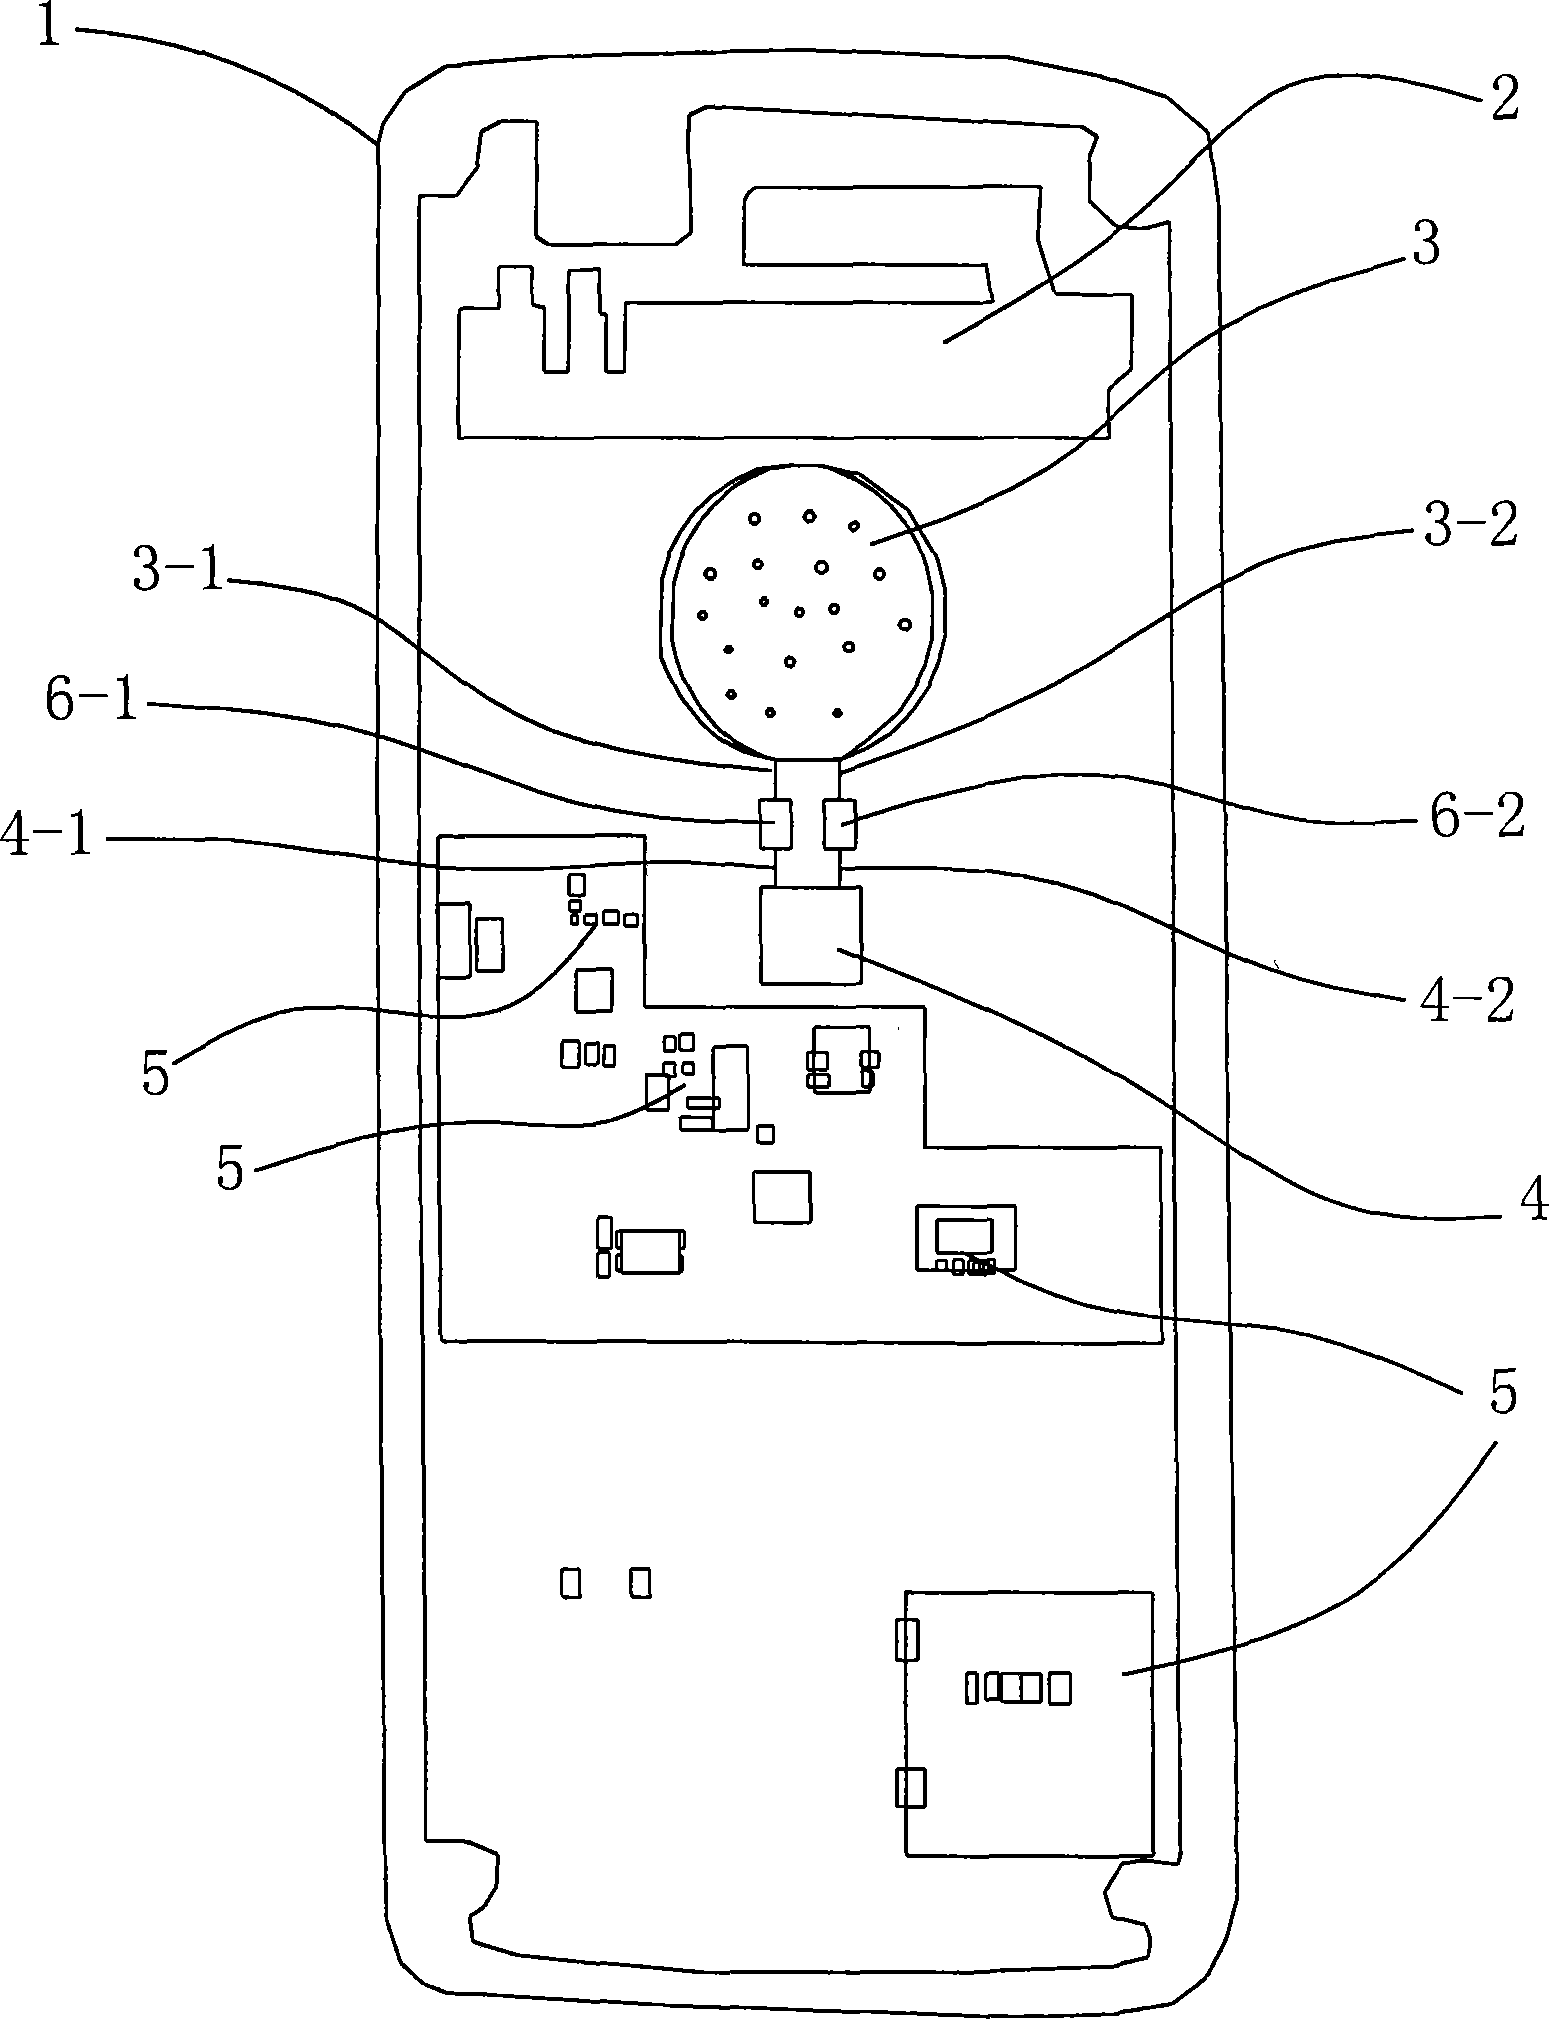 Device for preventing audio device interference